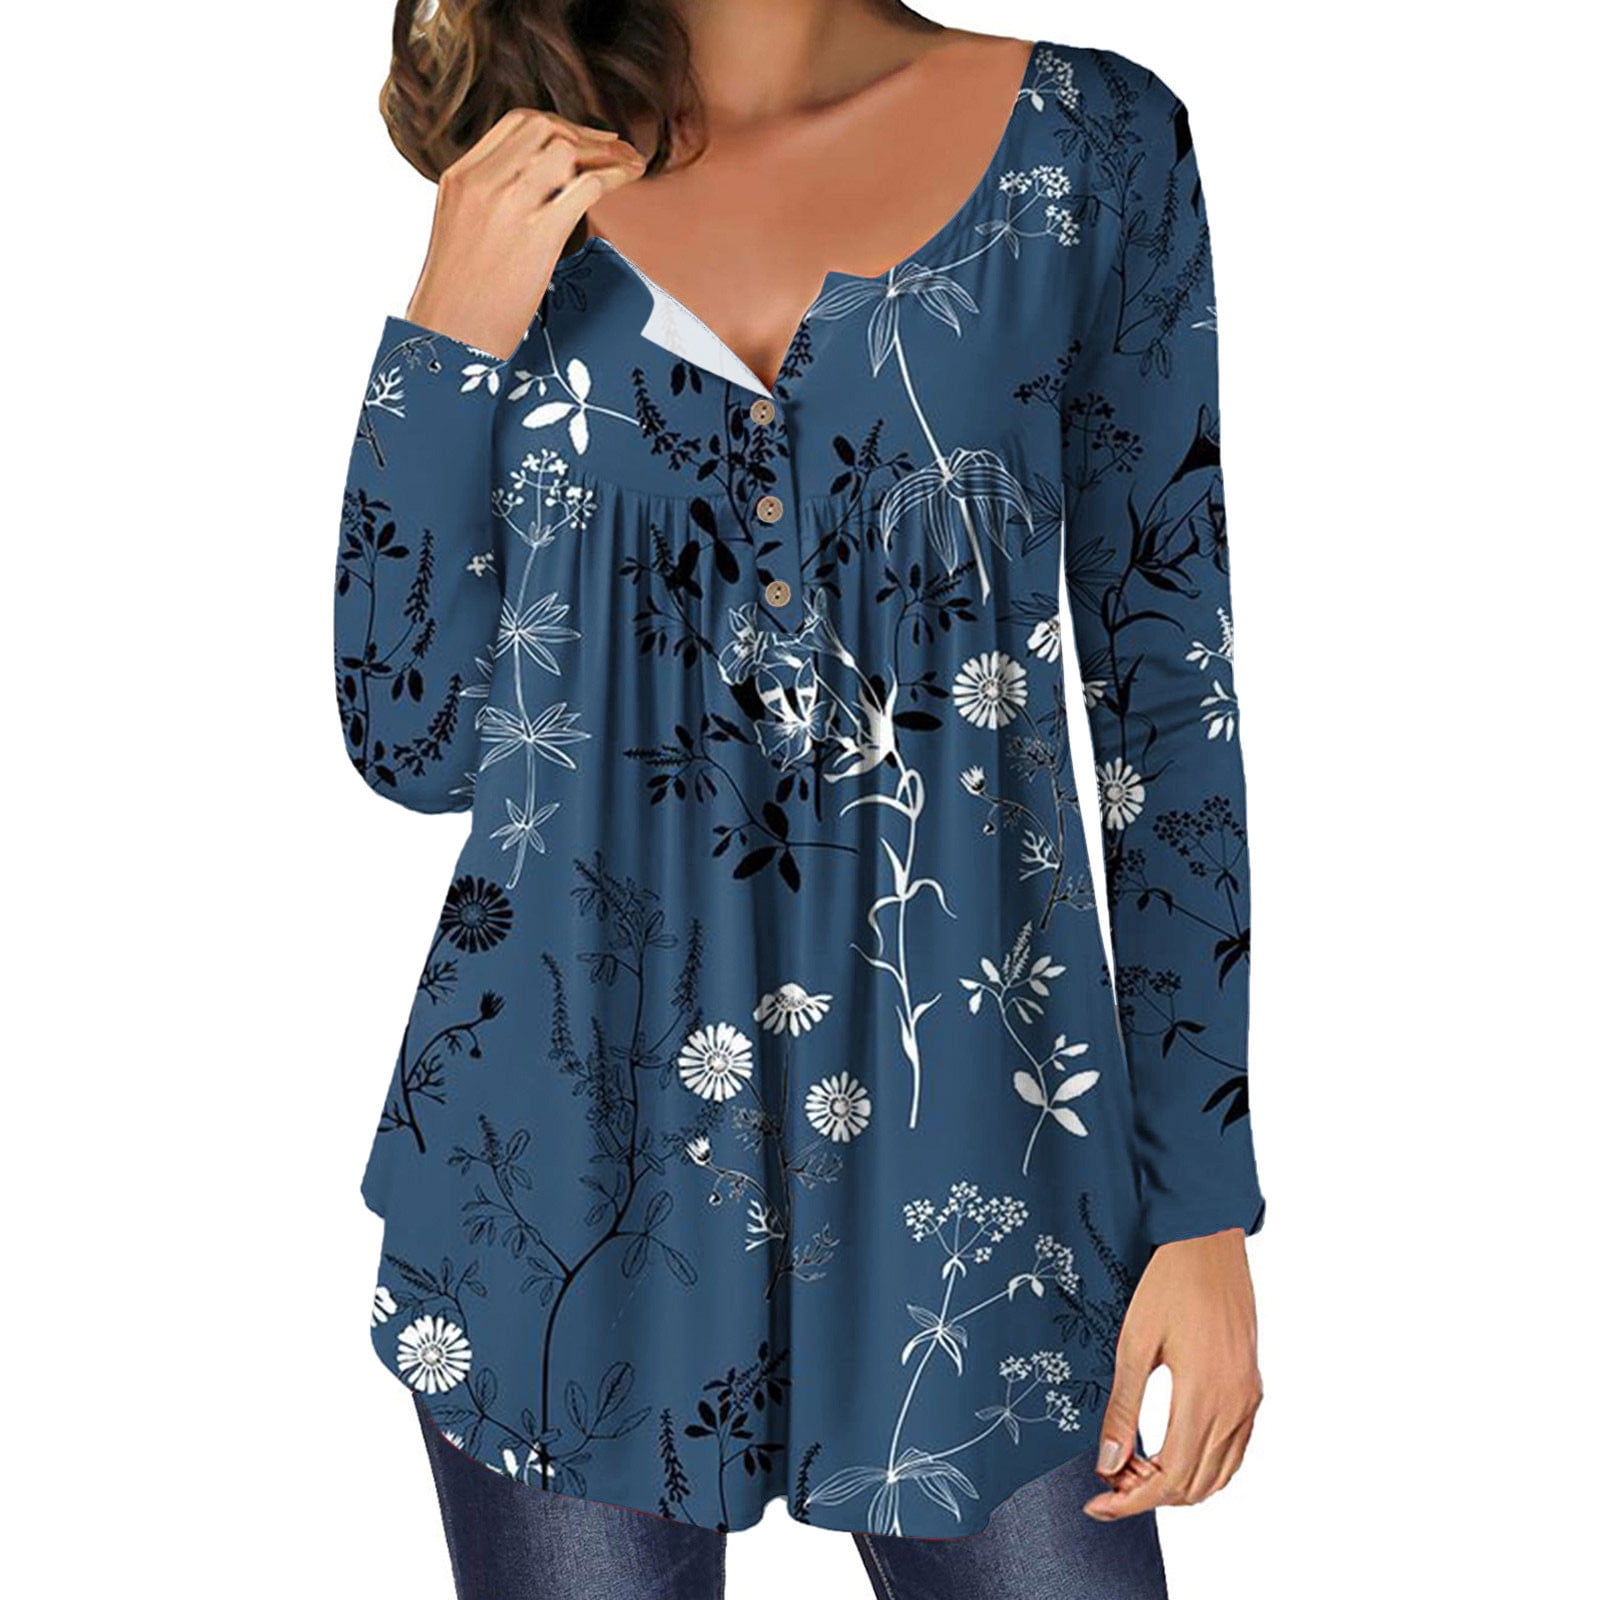 Women's Shirt Floral Print Long Sleeve Button up Casual Blouse Top at   Women’s Clothing store